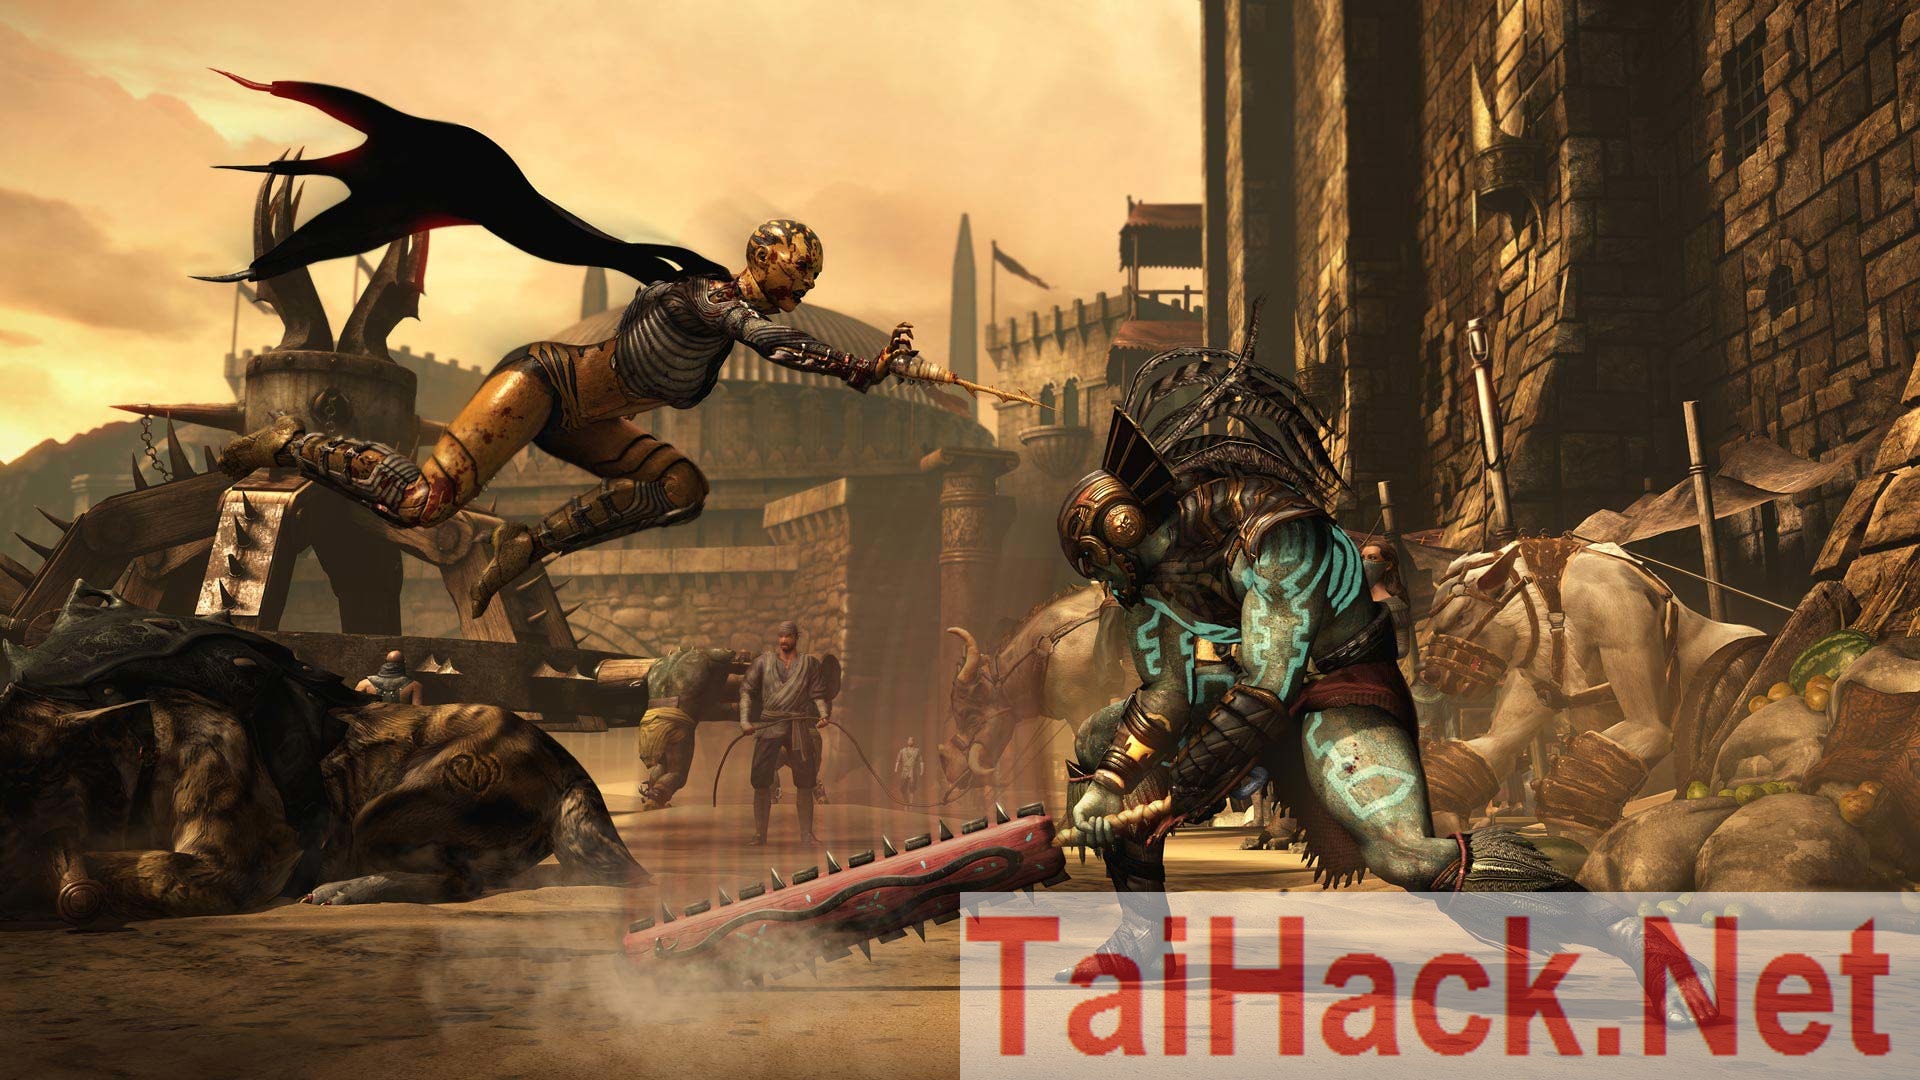 Download Hack MORTAL KOMBAT X MOD the adversary does not attack / no ability delay. The best fierce fighting game on 2019. With this hack, you can absolutely possess the top-notch skills that hacking enemies cannot attack you and you do not delay any kind of skill. Update all the latest hack for free daily at TaiHack.Net.